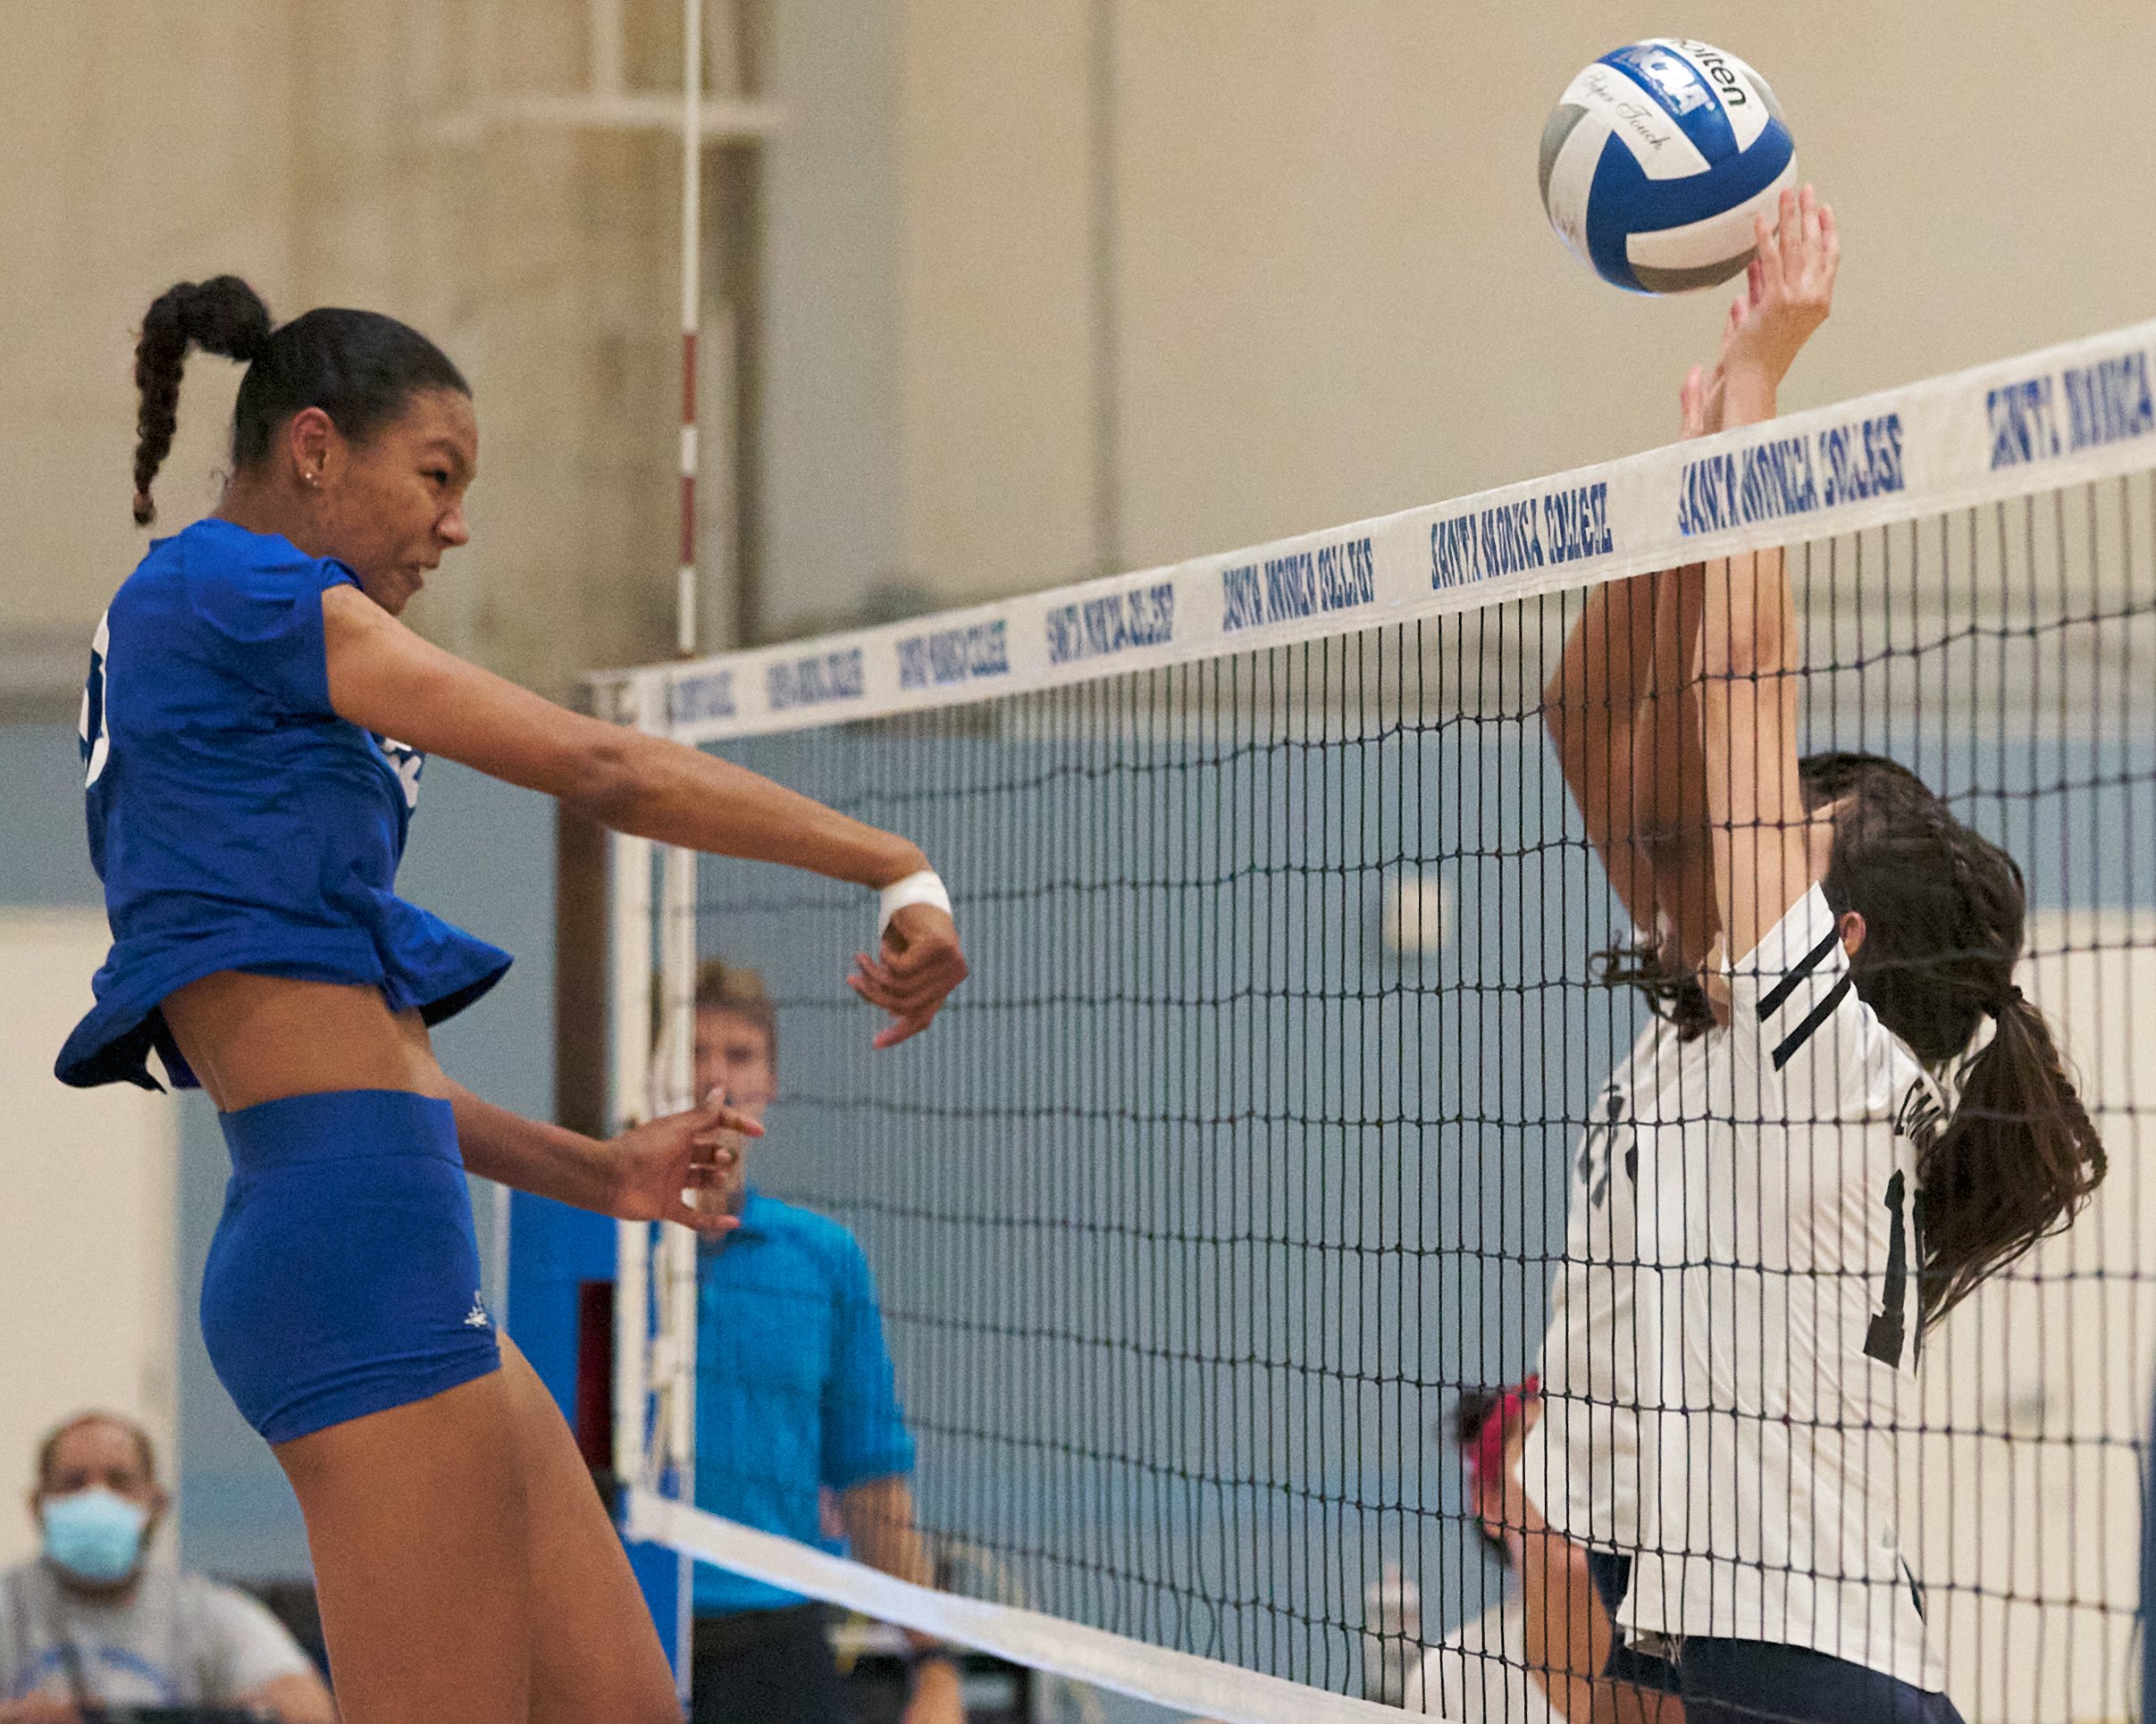  Santa Monica College Corsairs' Rain Martinez hits the ball past College of the Canyons Cougars' Sahliyah Ravare and Ariana Vargas during the women's volleyball match on Friday, Oct. 28, 2022, at SMC Gym in Santa Monica, Calif. The Corsairs lost 1-3.